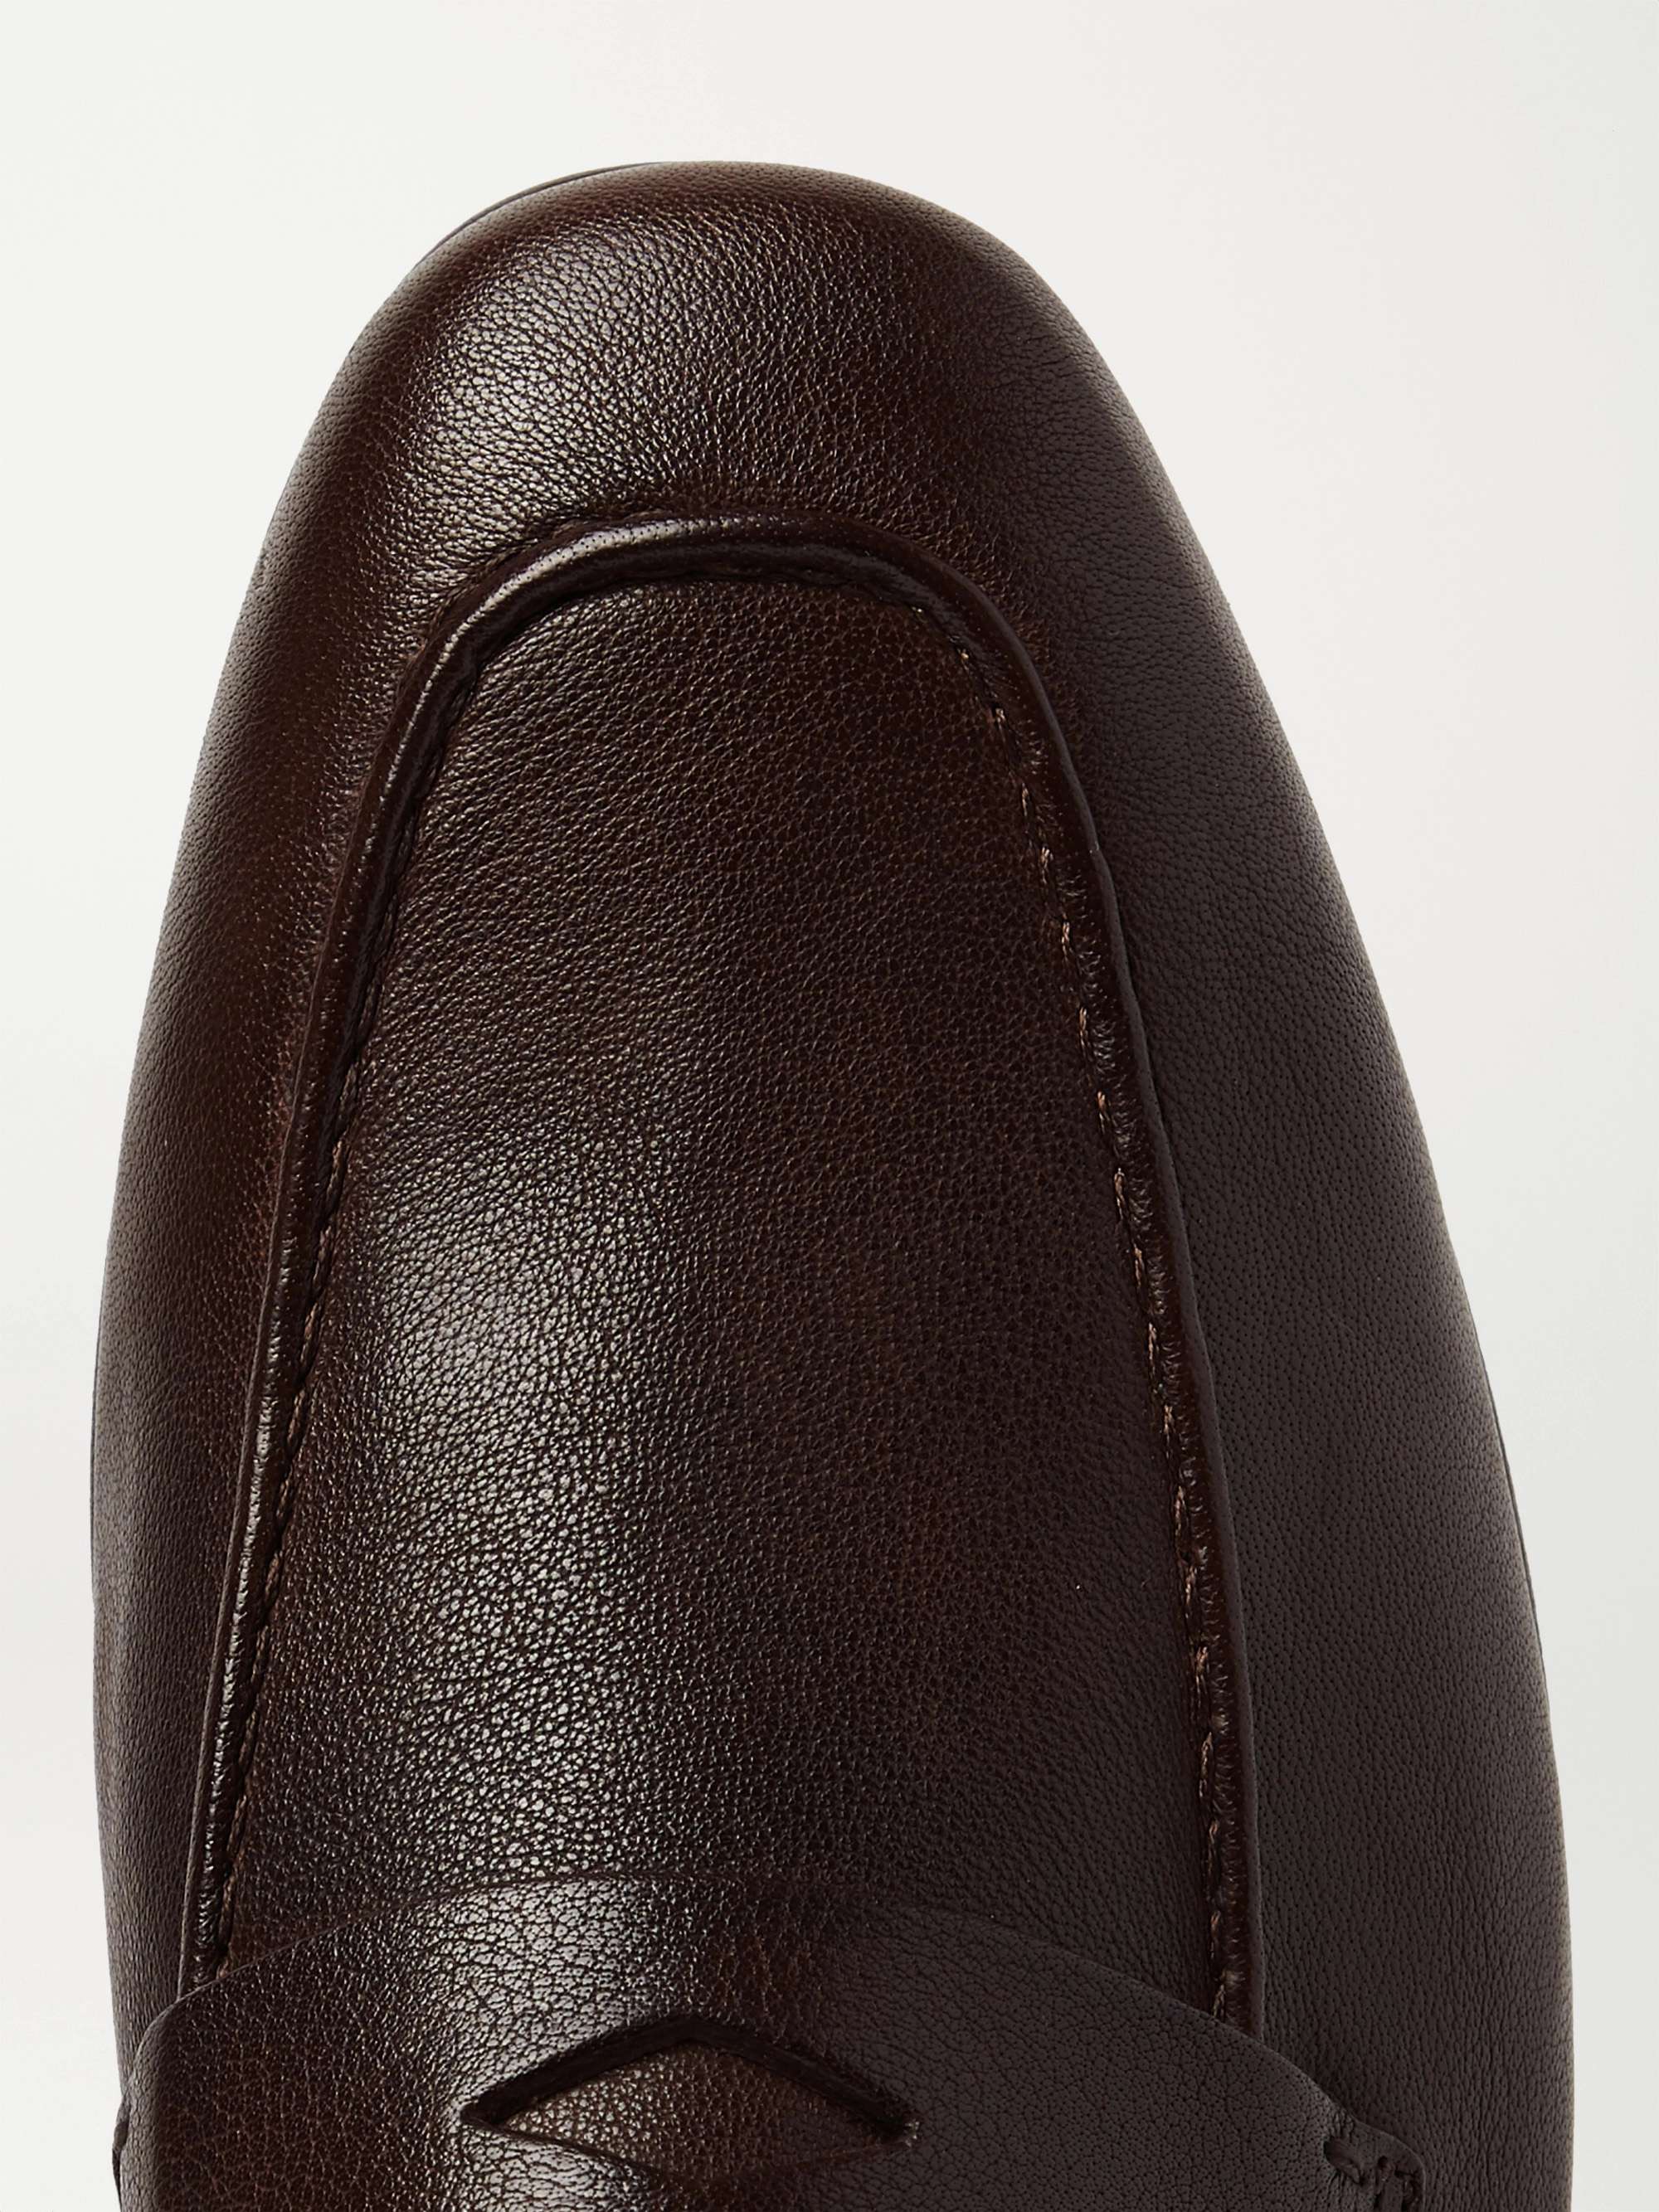 DUNHILL Chiltern Leather Loafers